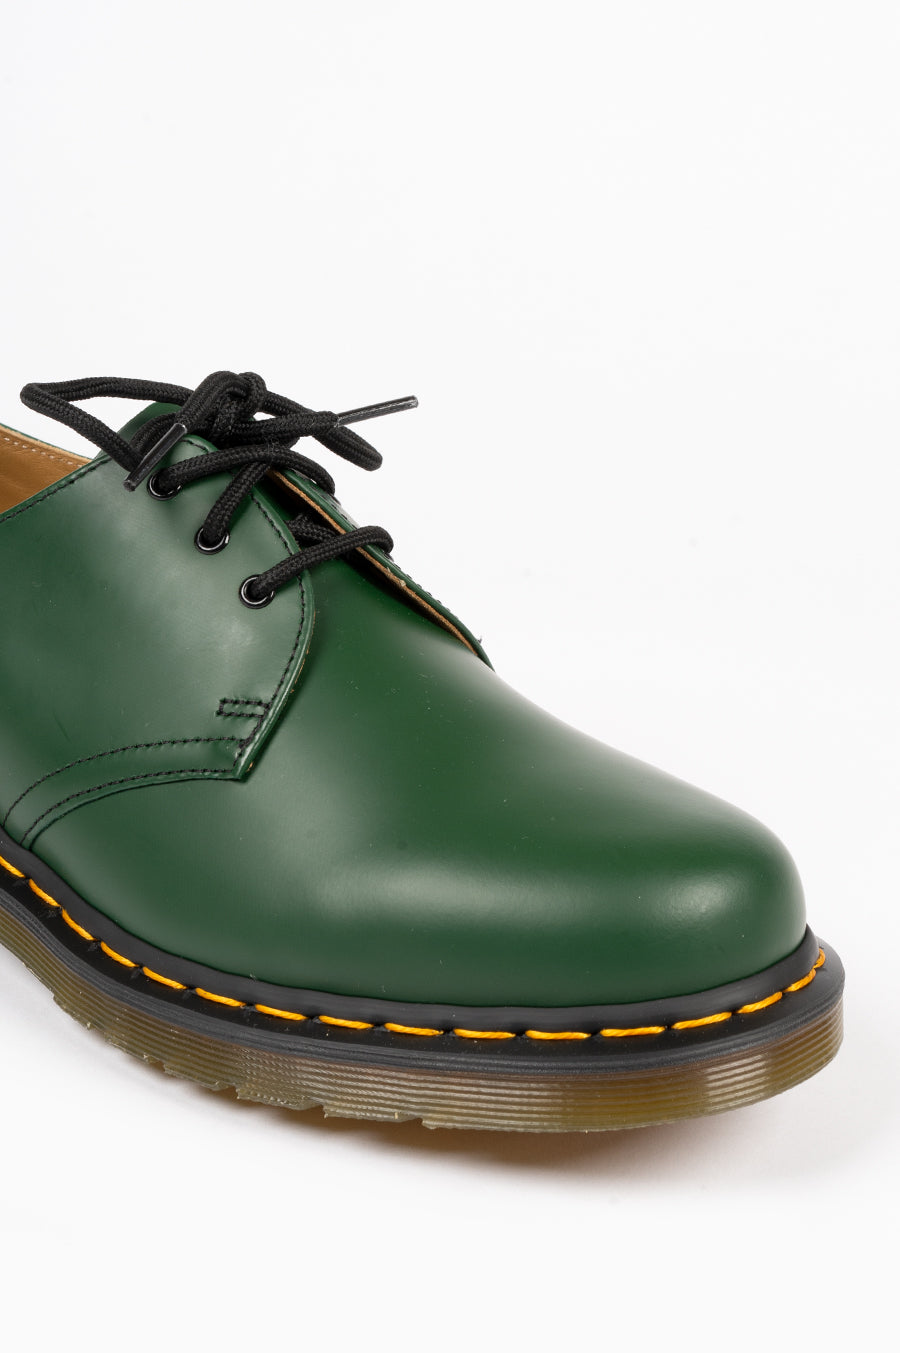 DR MARTENS 1461 SMOOTH GREEN